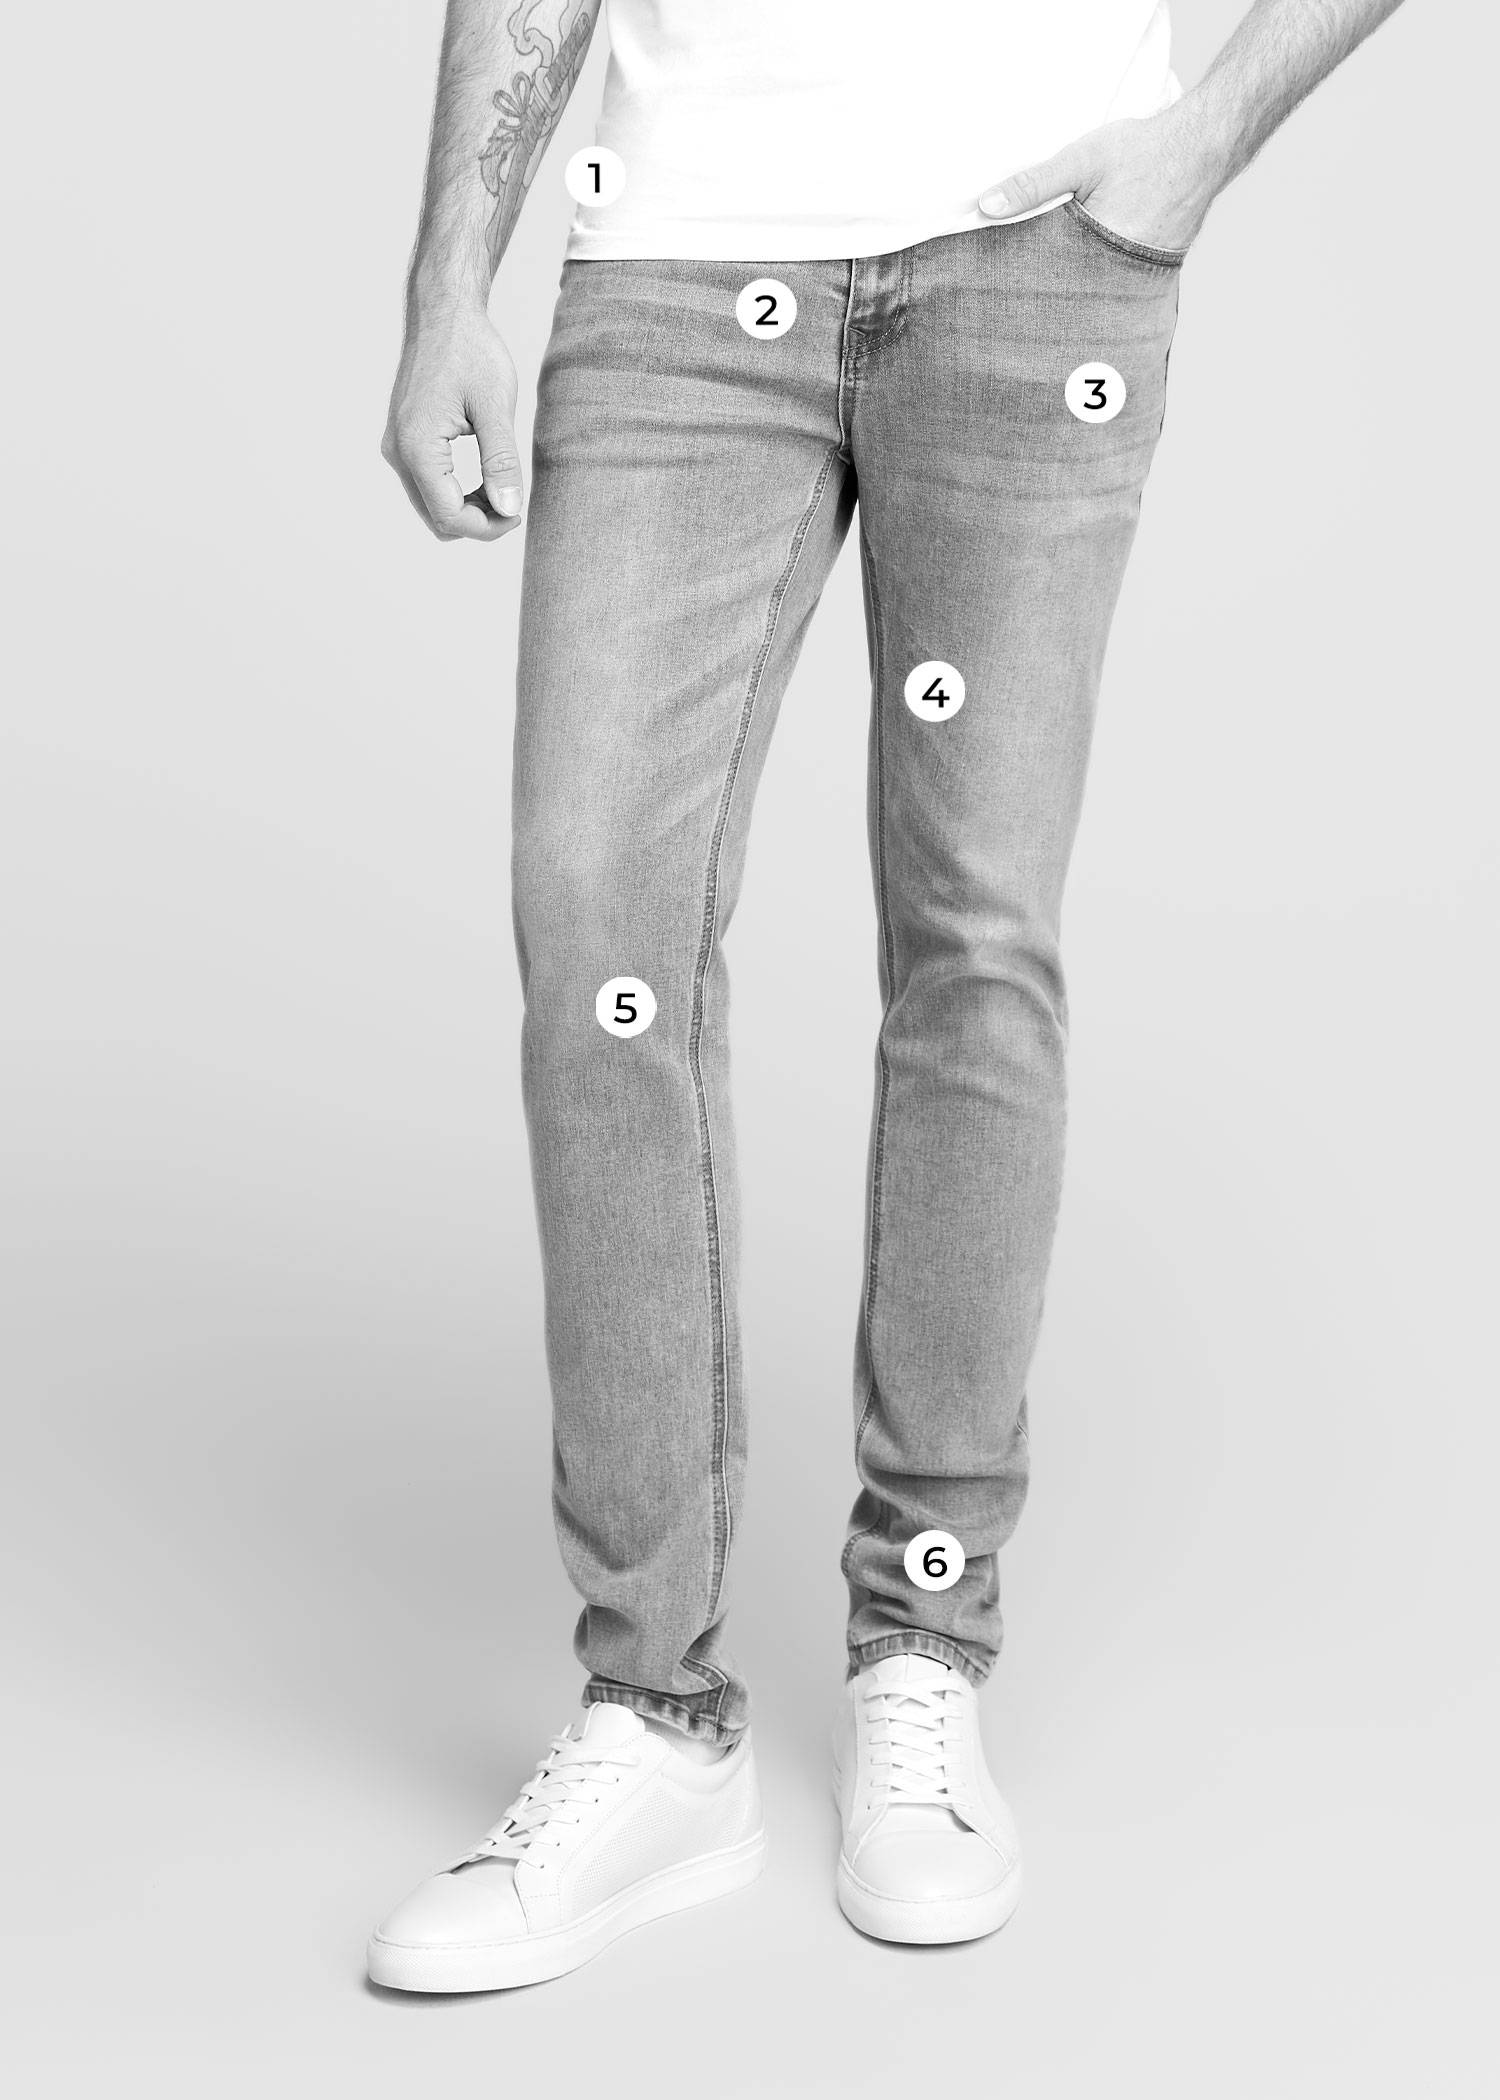 Tall man wearing light wash jeans with his hand in his pocket.